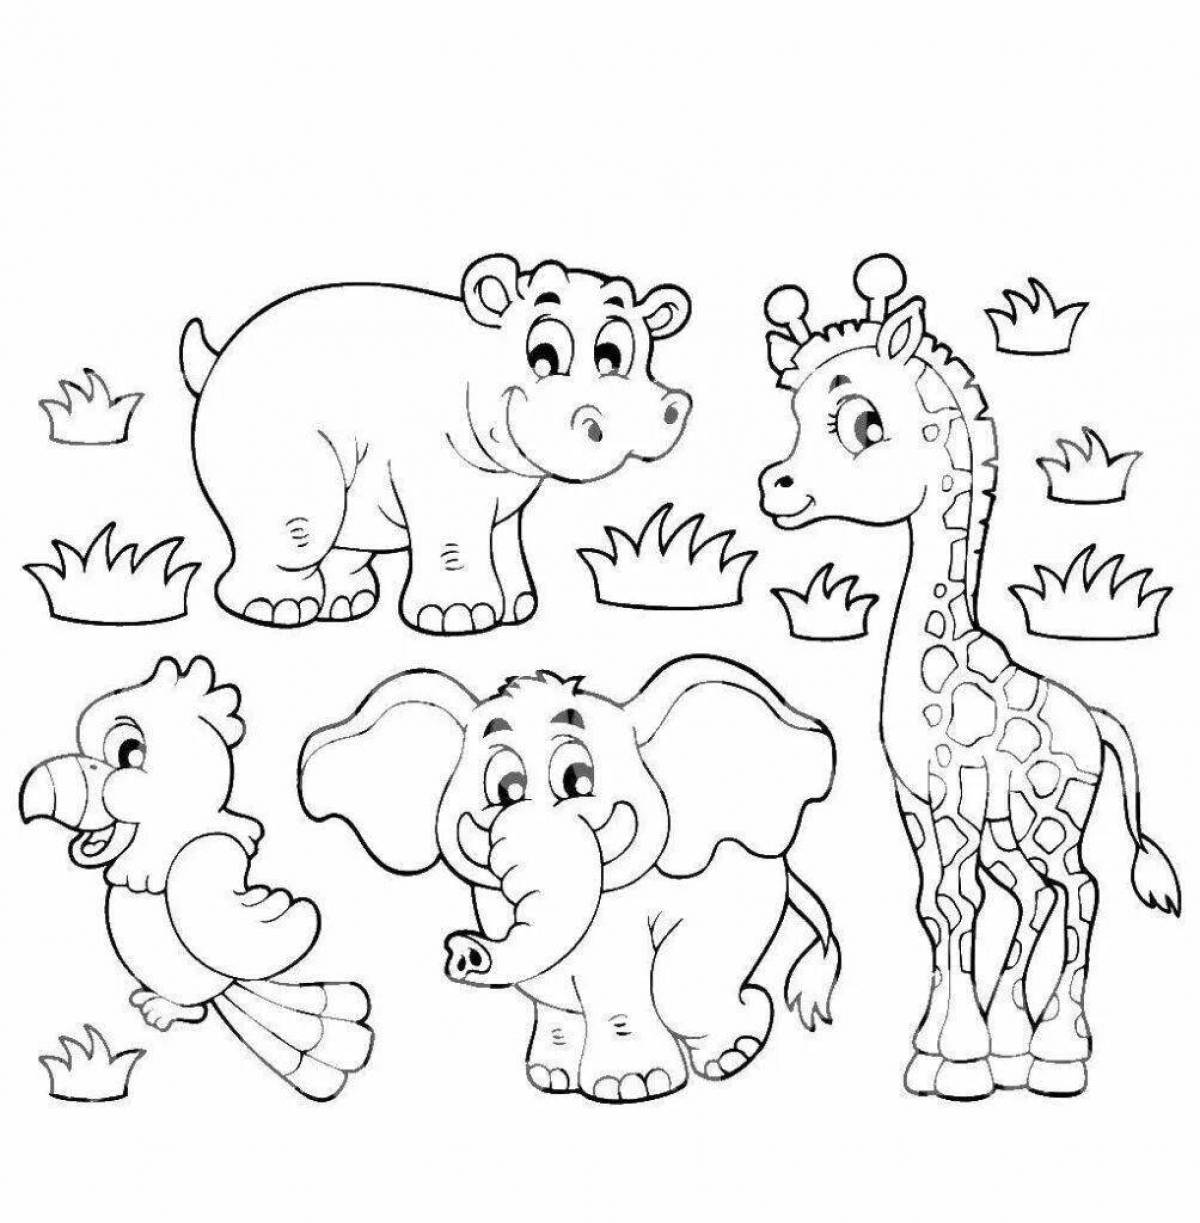 Bright hippo coloring page